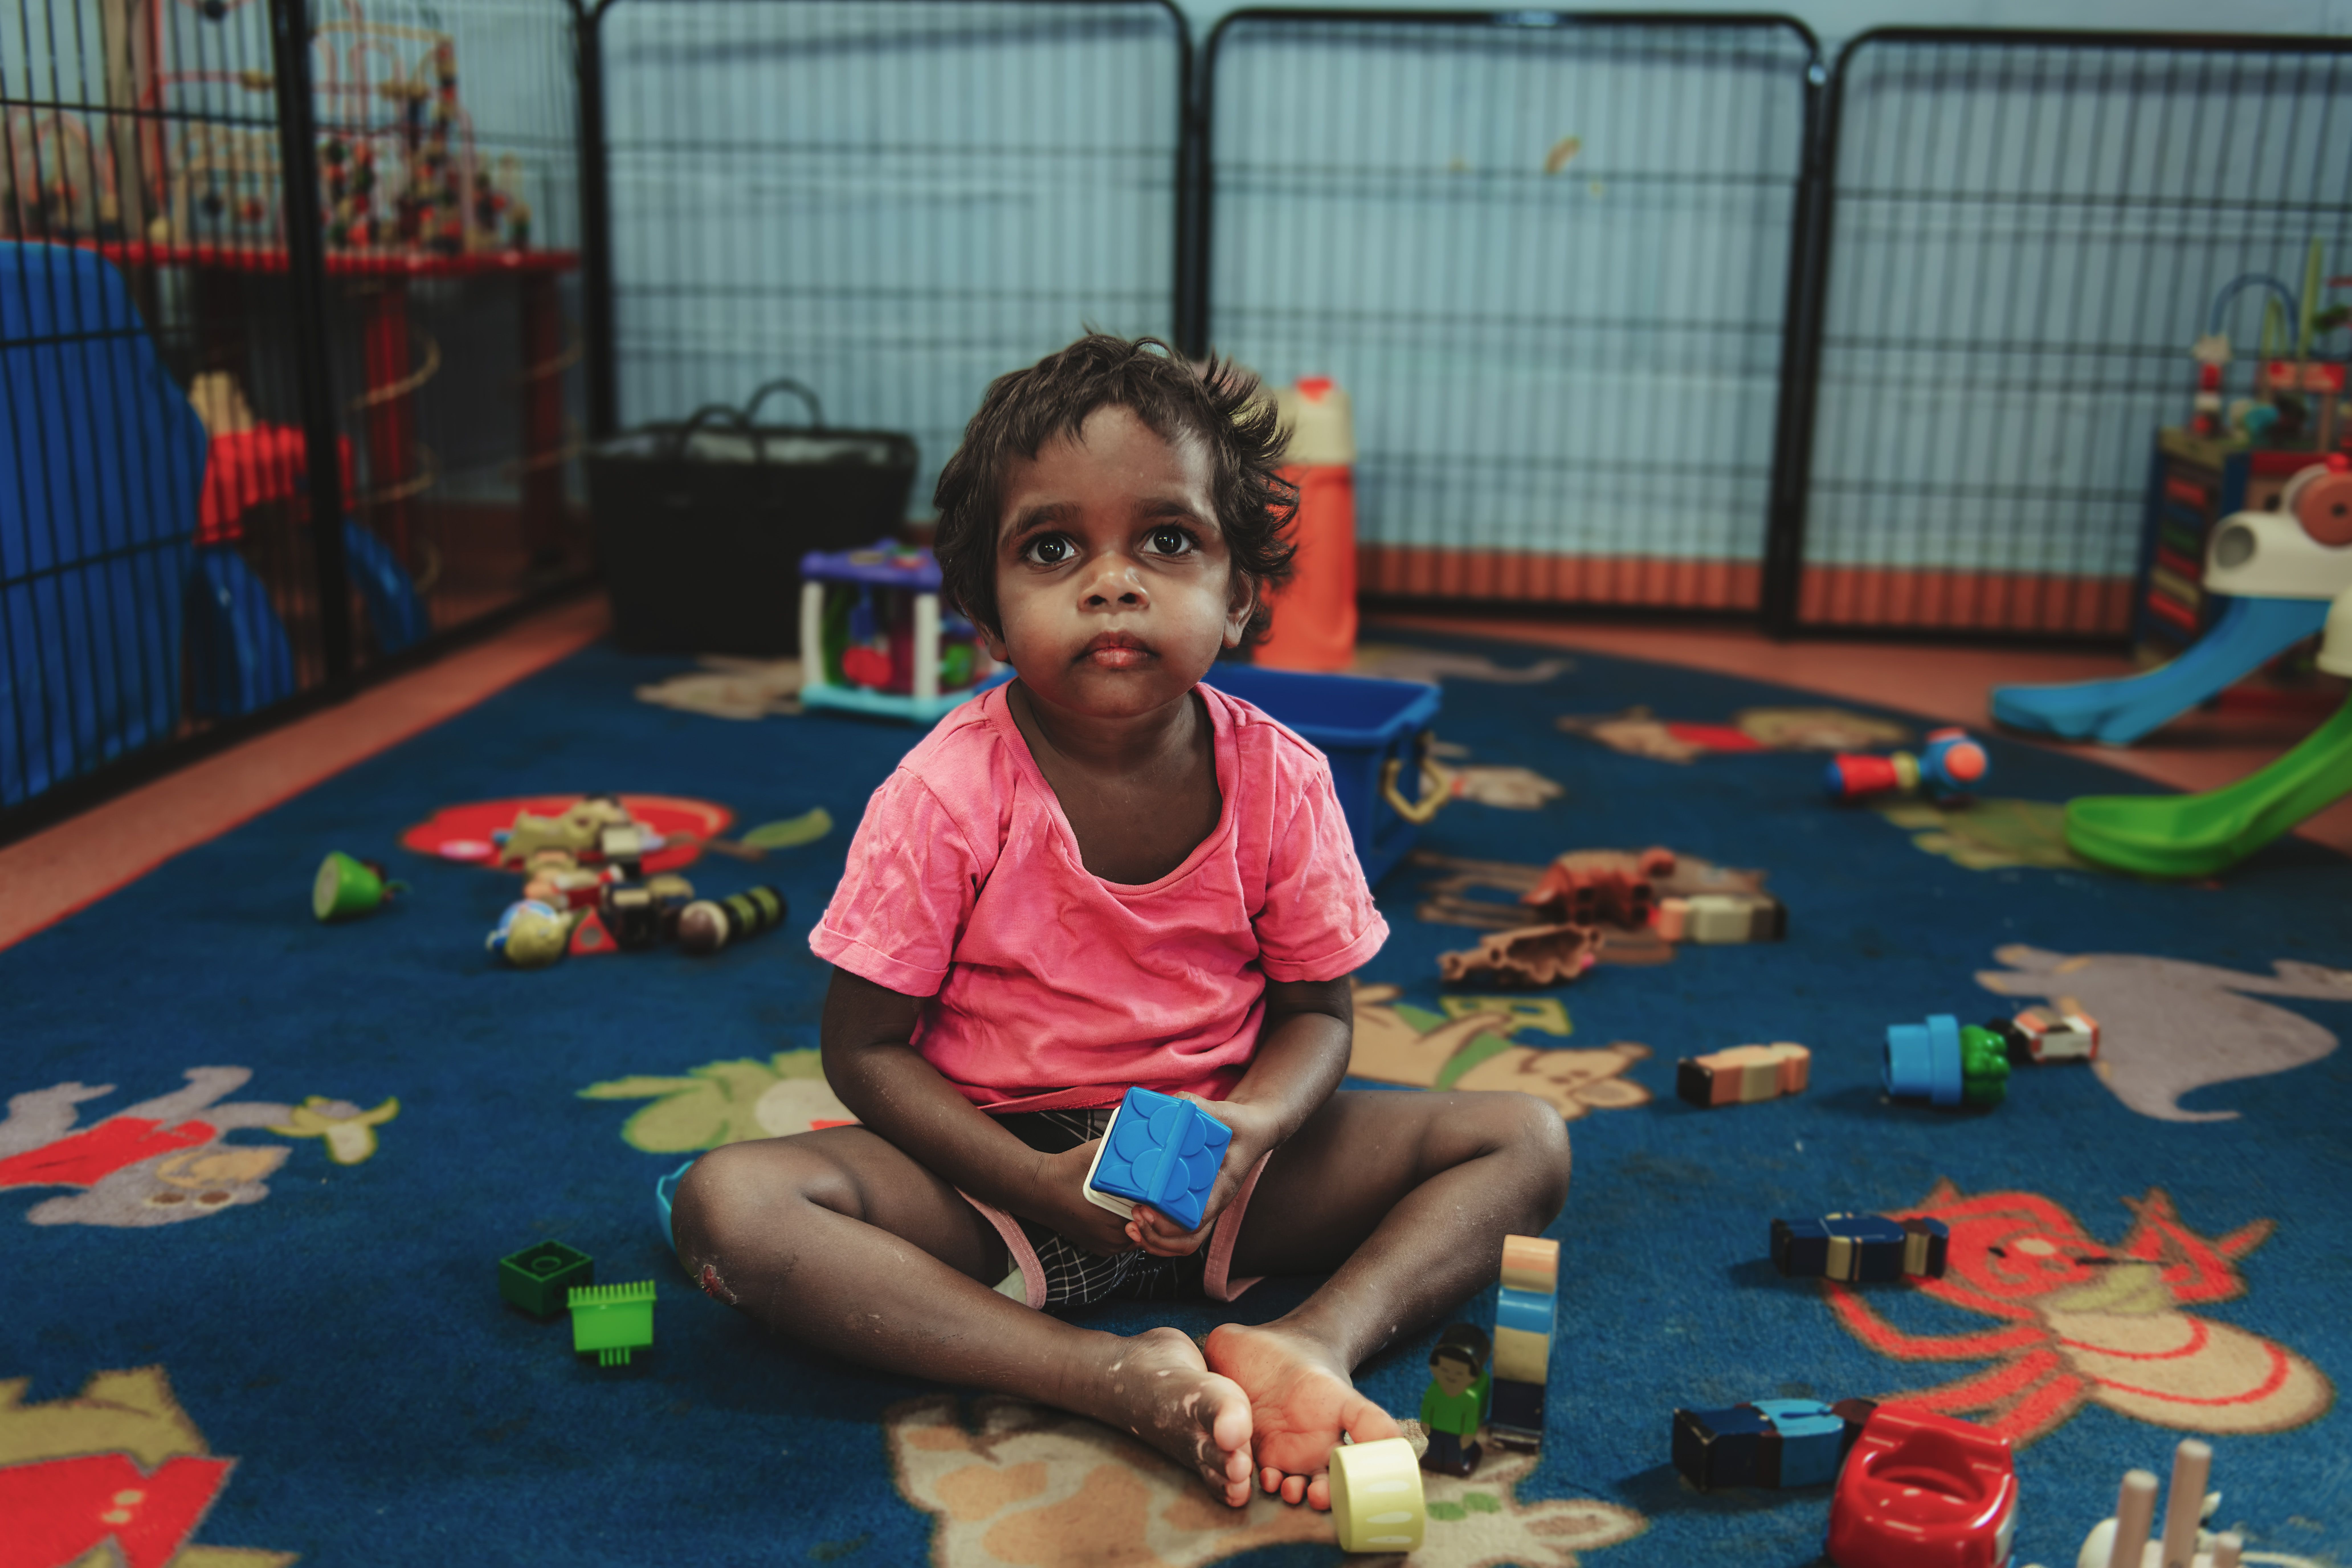 Young child sitting on a rug surrounded by toys, holding a blue block